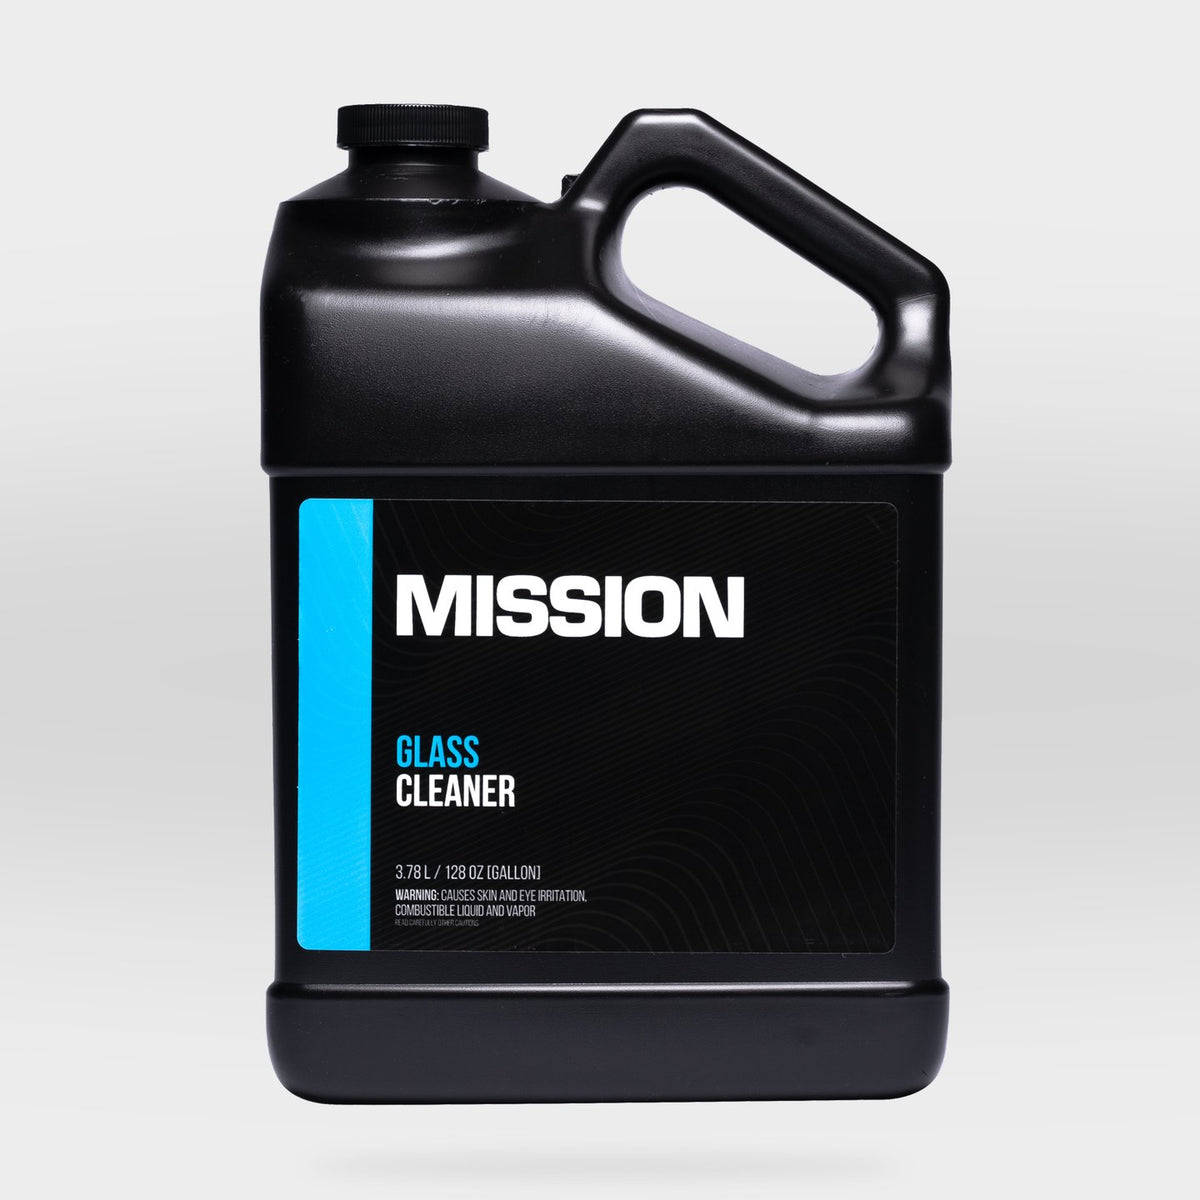 Mission Glass Cleaner